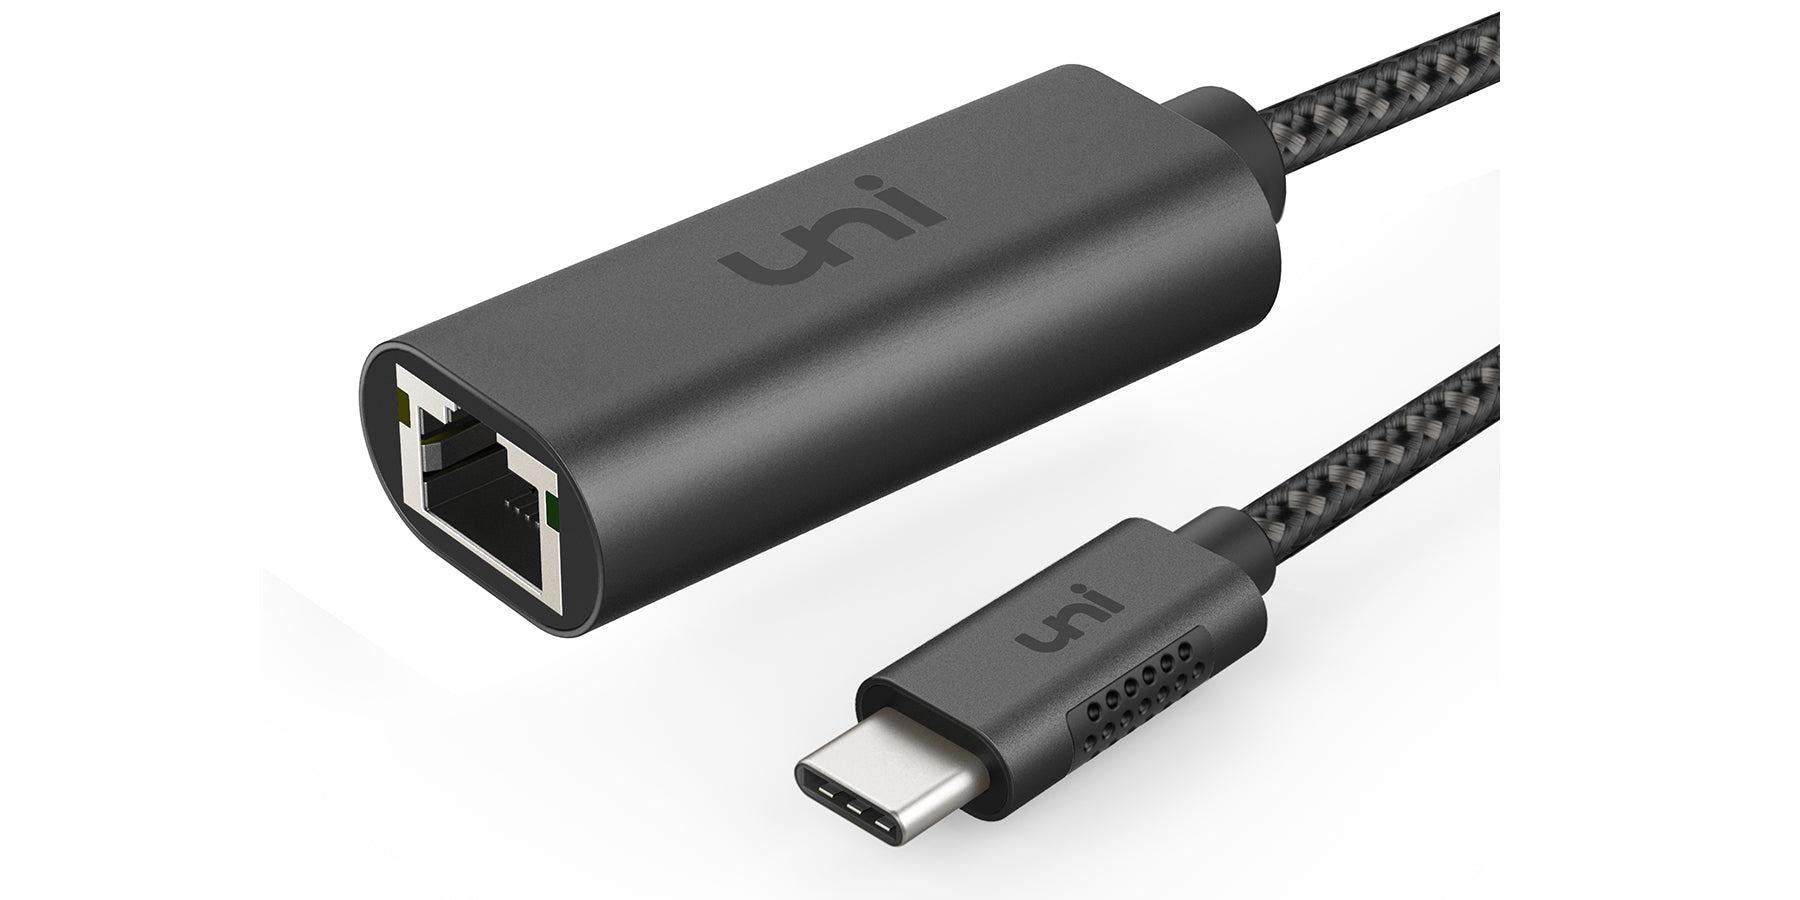 1G USB-C to Ethernet Adapter - slim